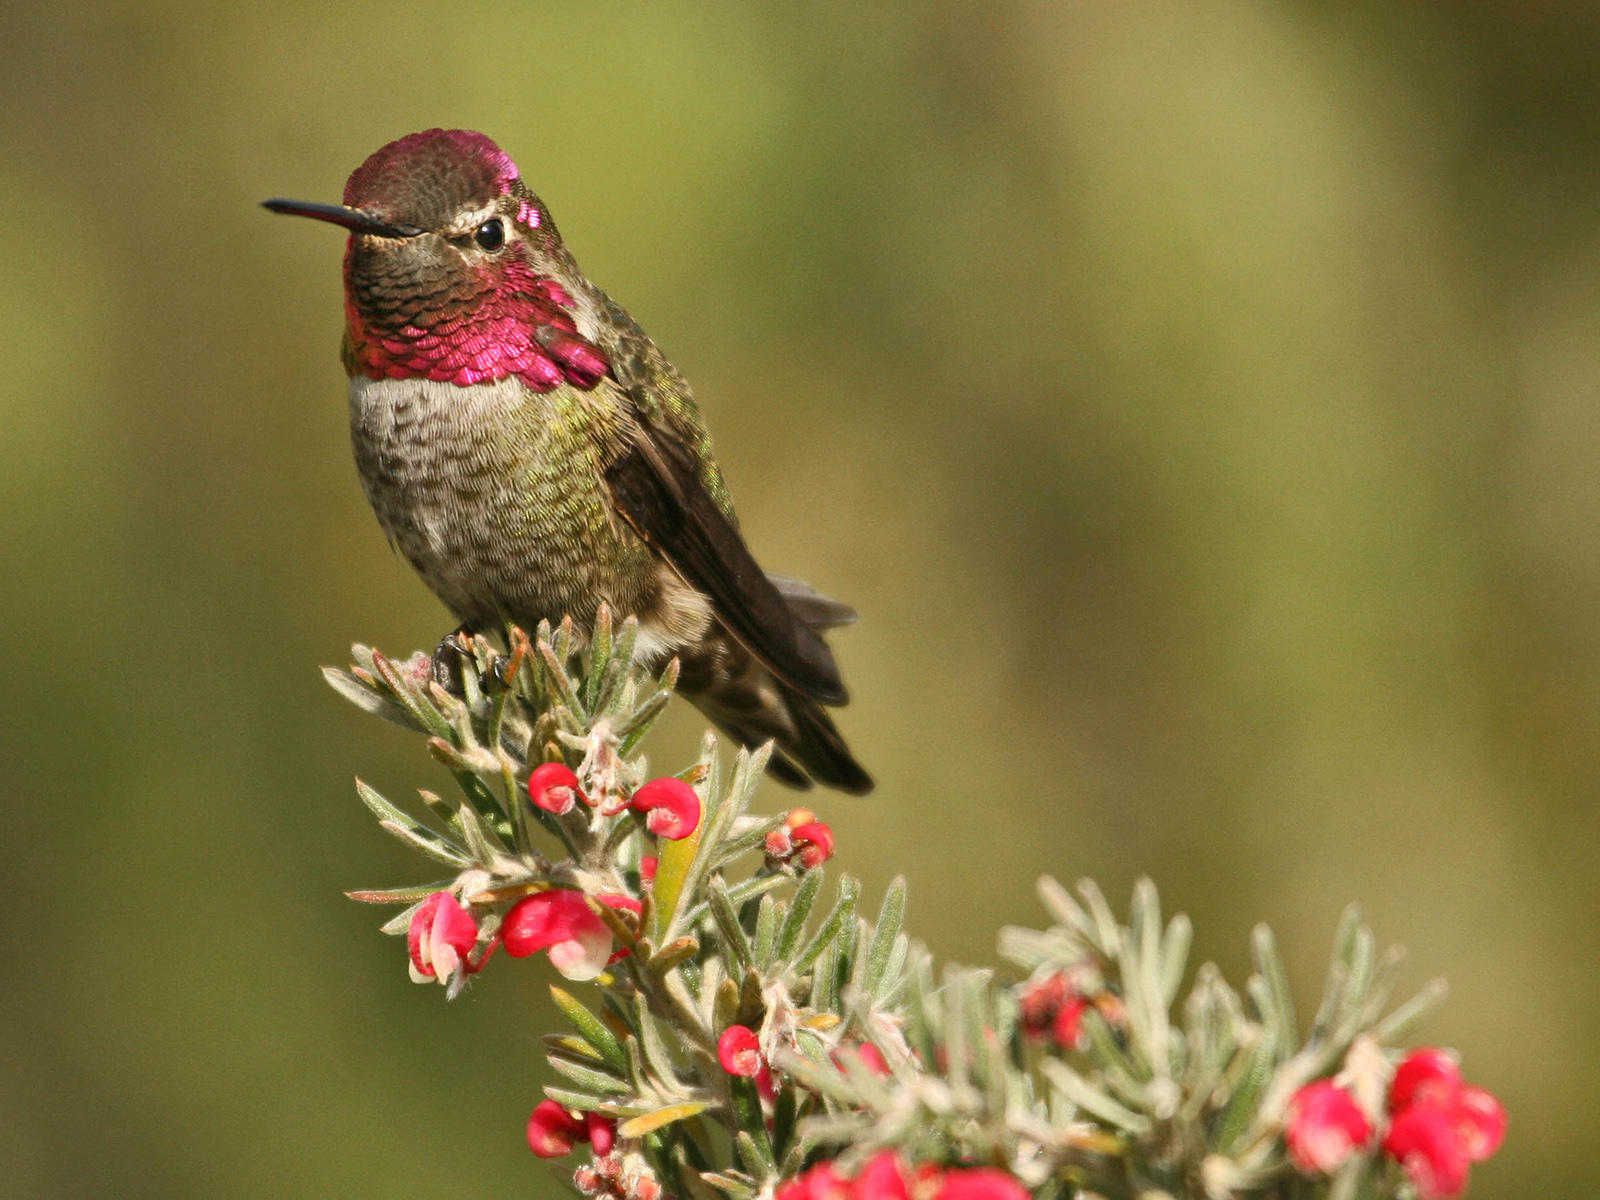 Colorful Anna's hummingbird perched on a branch with red flowers.